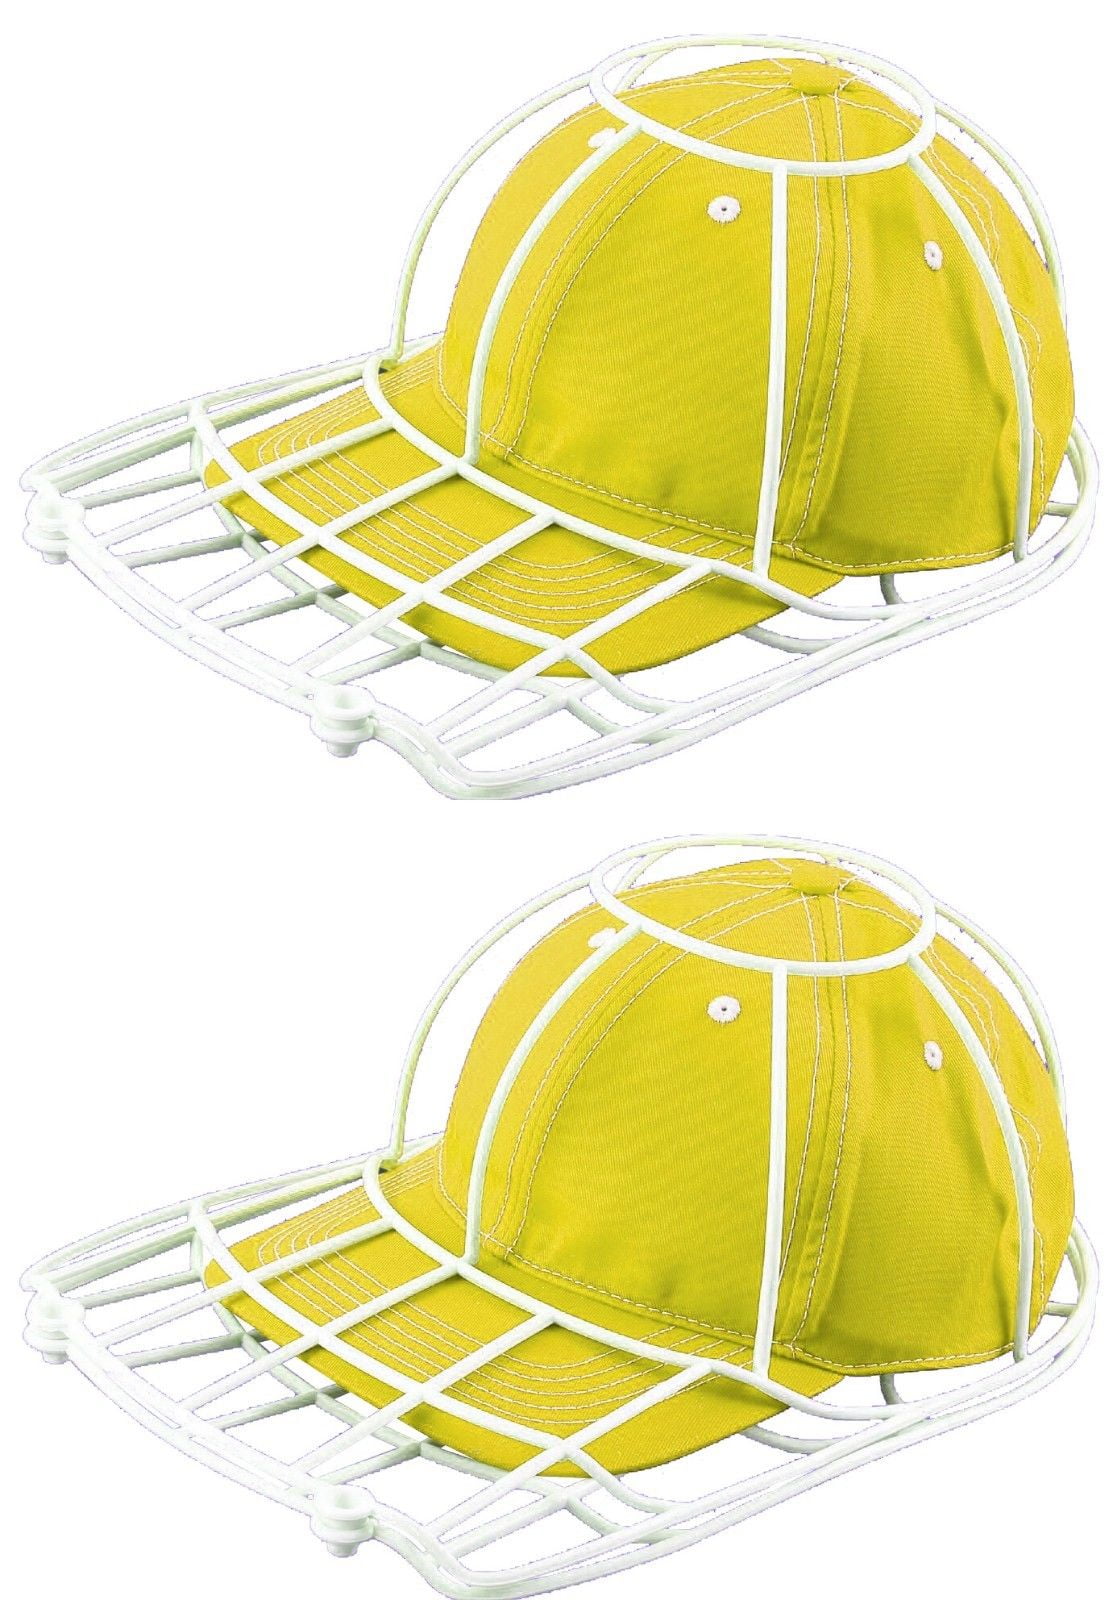 hat bill shaper, hat bill shaper Suppliers and Manufacturers at